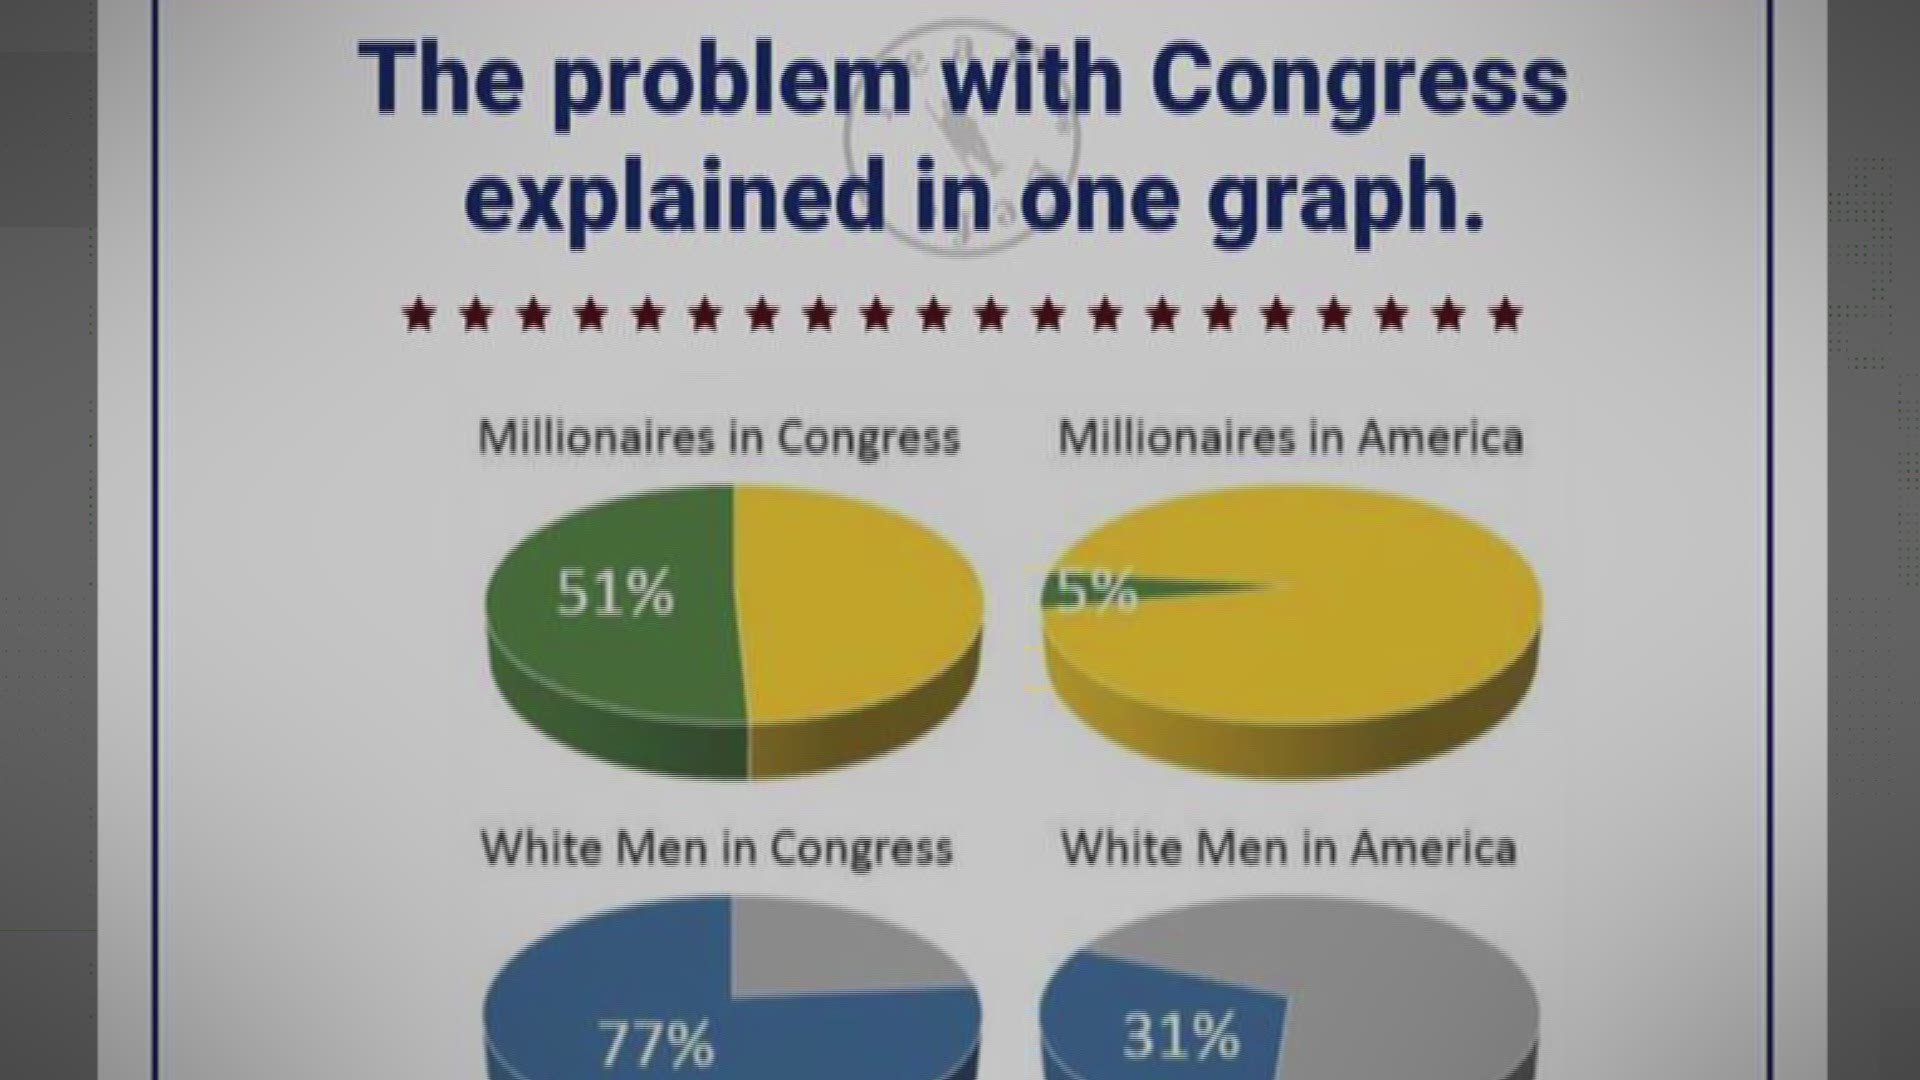 A viral chart is going around claiming that "the problem with congress" could be the percentages of millionaires, white men and members older than 55.